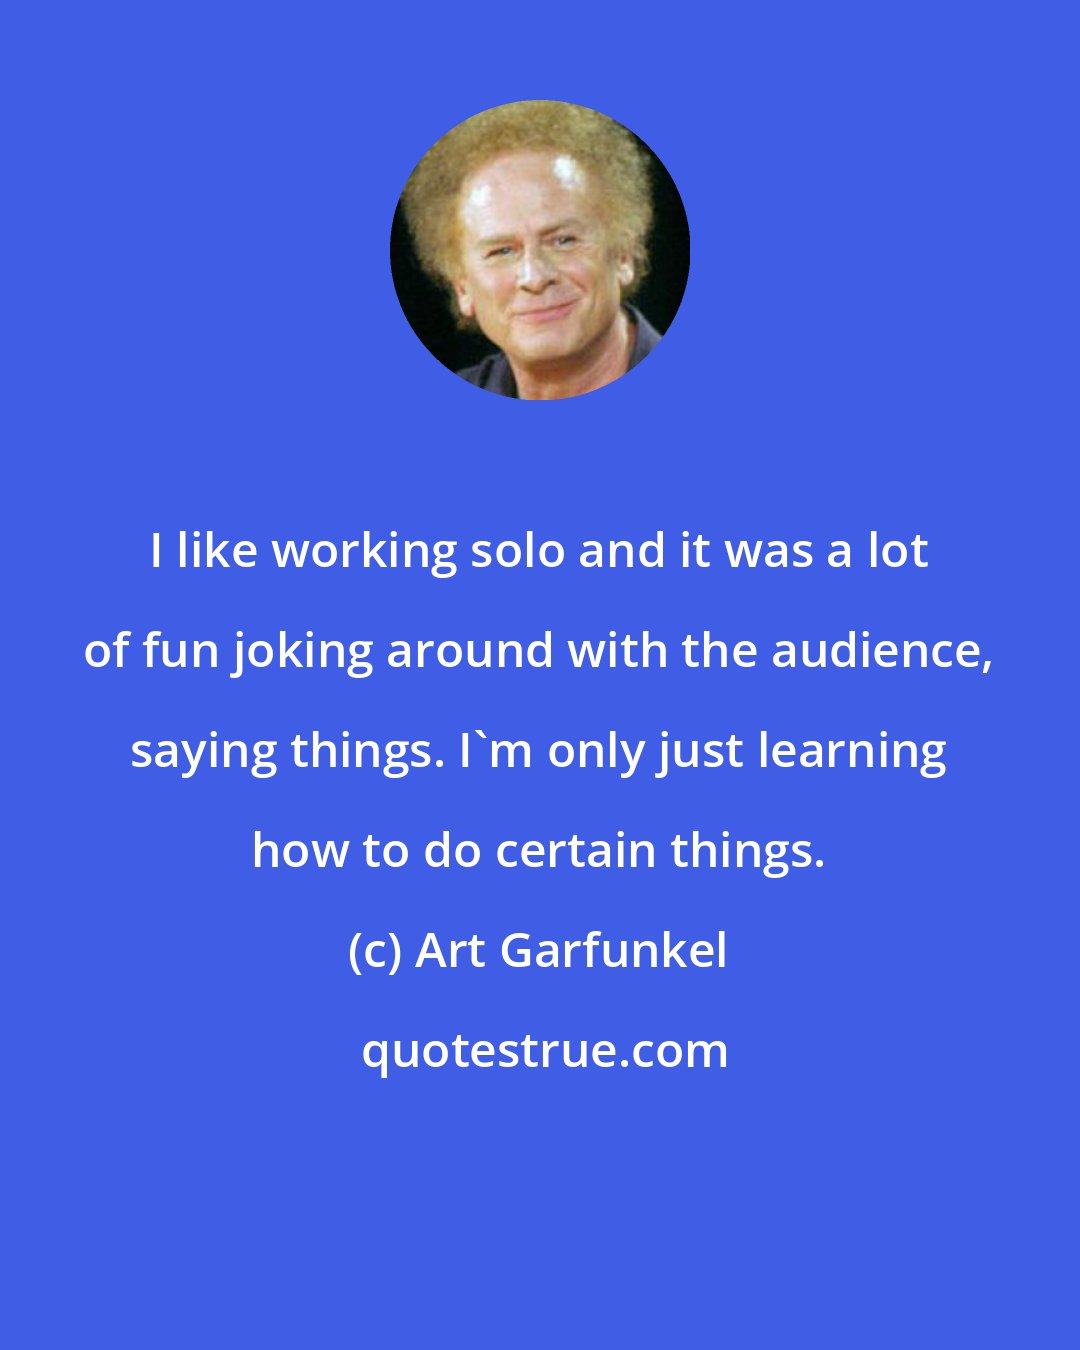 Art Garfunkel: I like working solo and it was a lot of fun joking around with the audience, saying things. I'm only just learning how to do certain things.